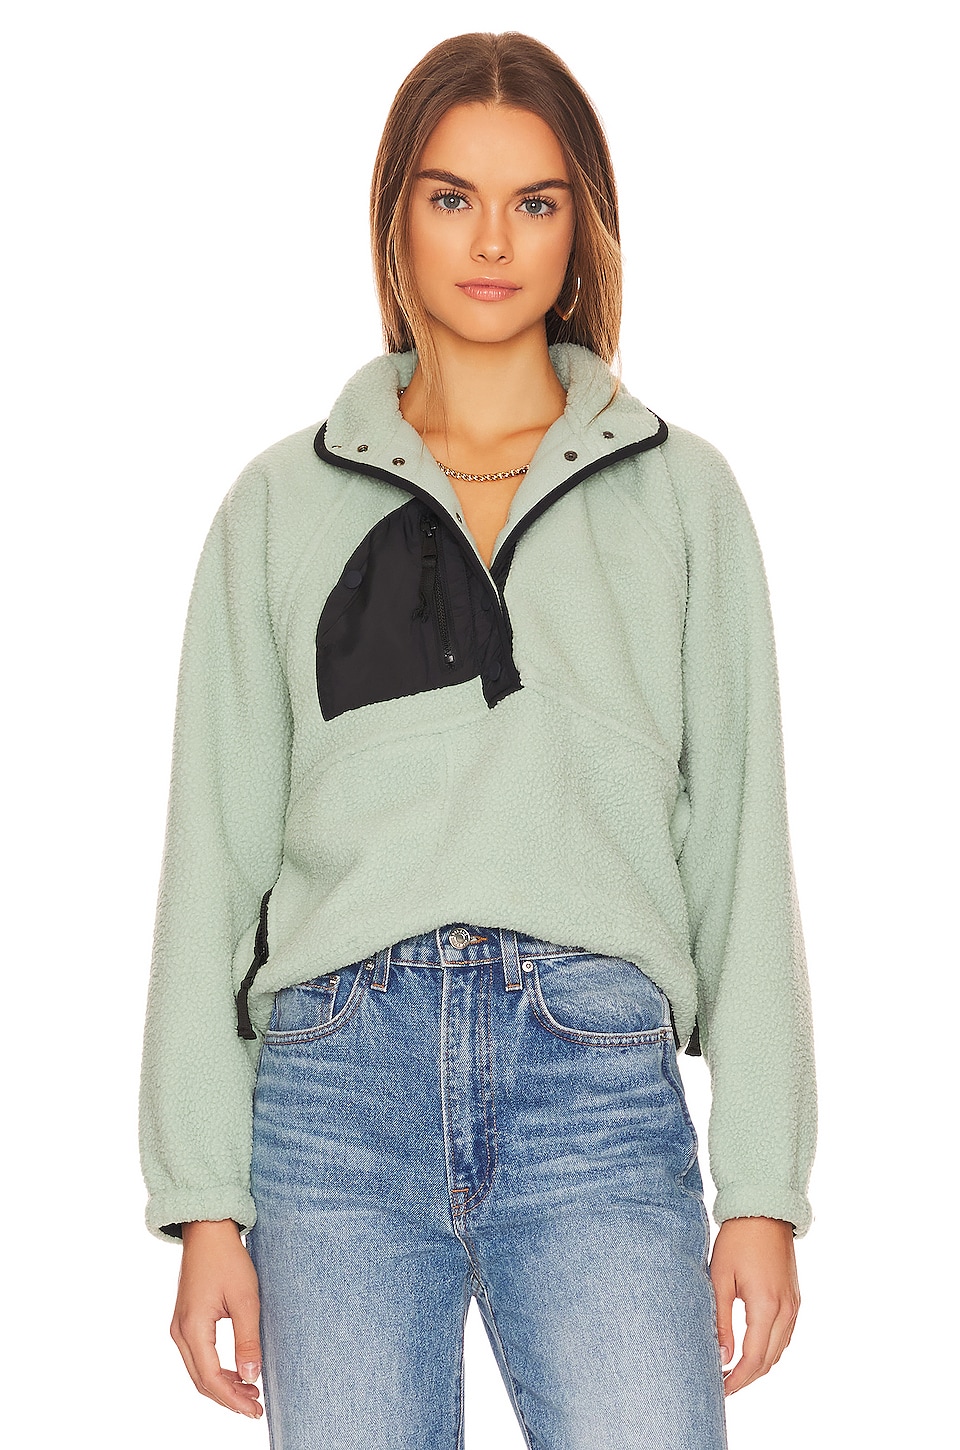 Free People x FP Movement Hit The Slopes Pullover in Aqua Haze | REVOLVE